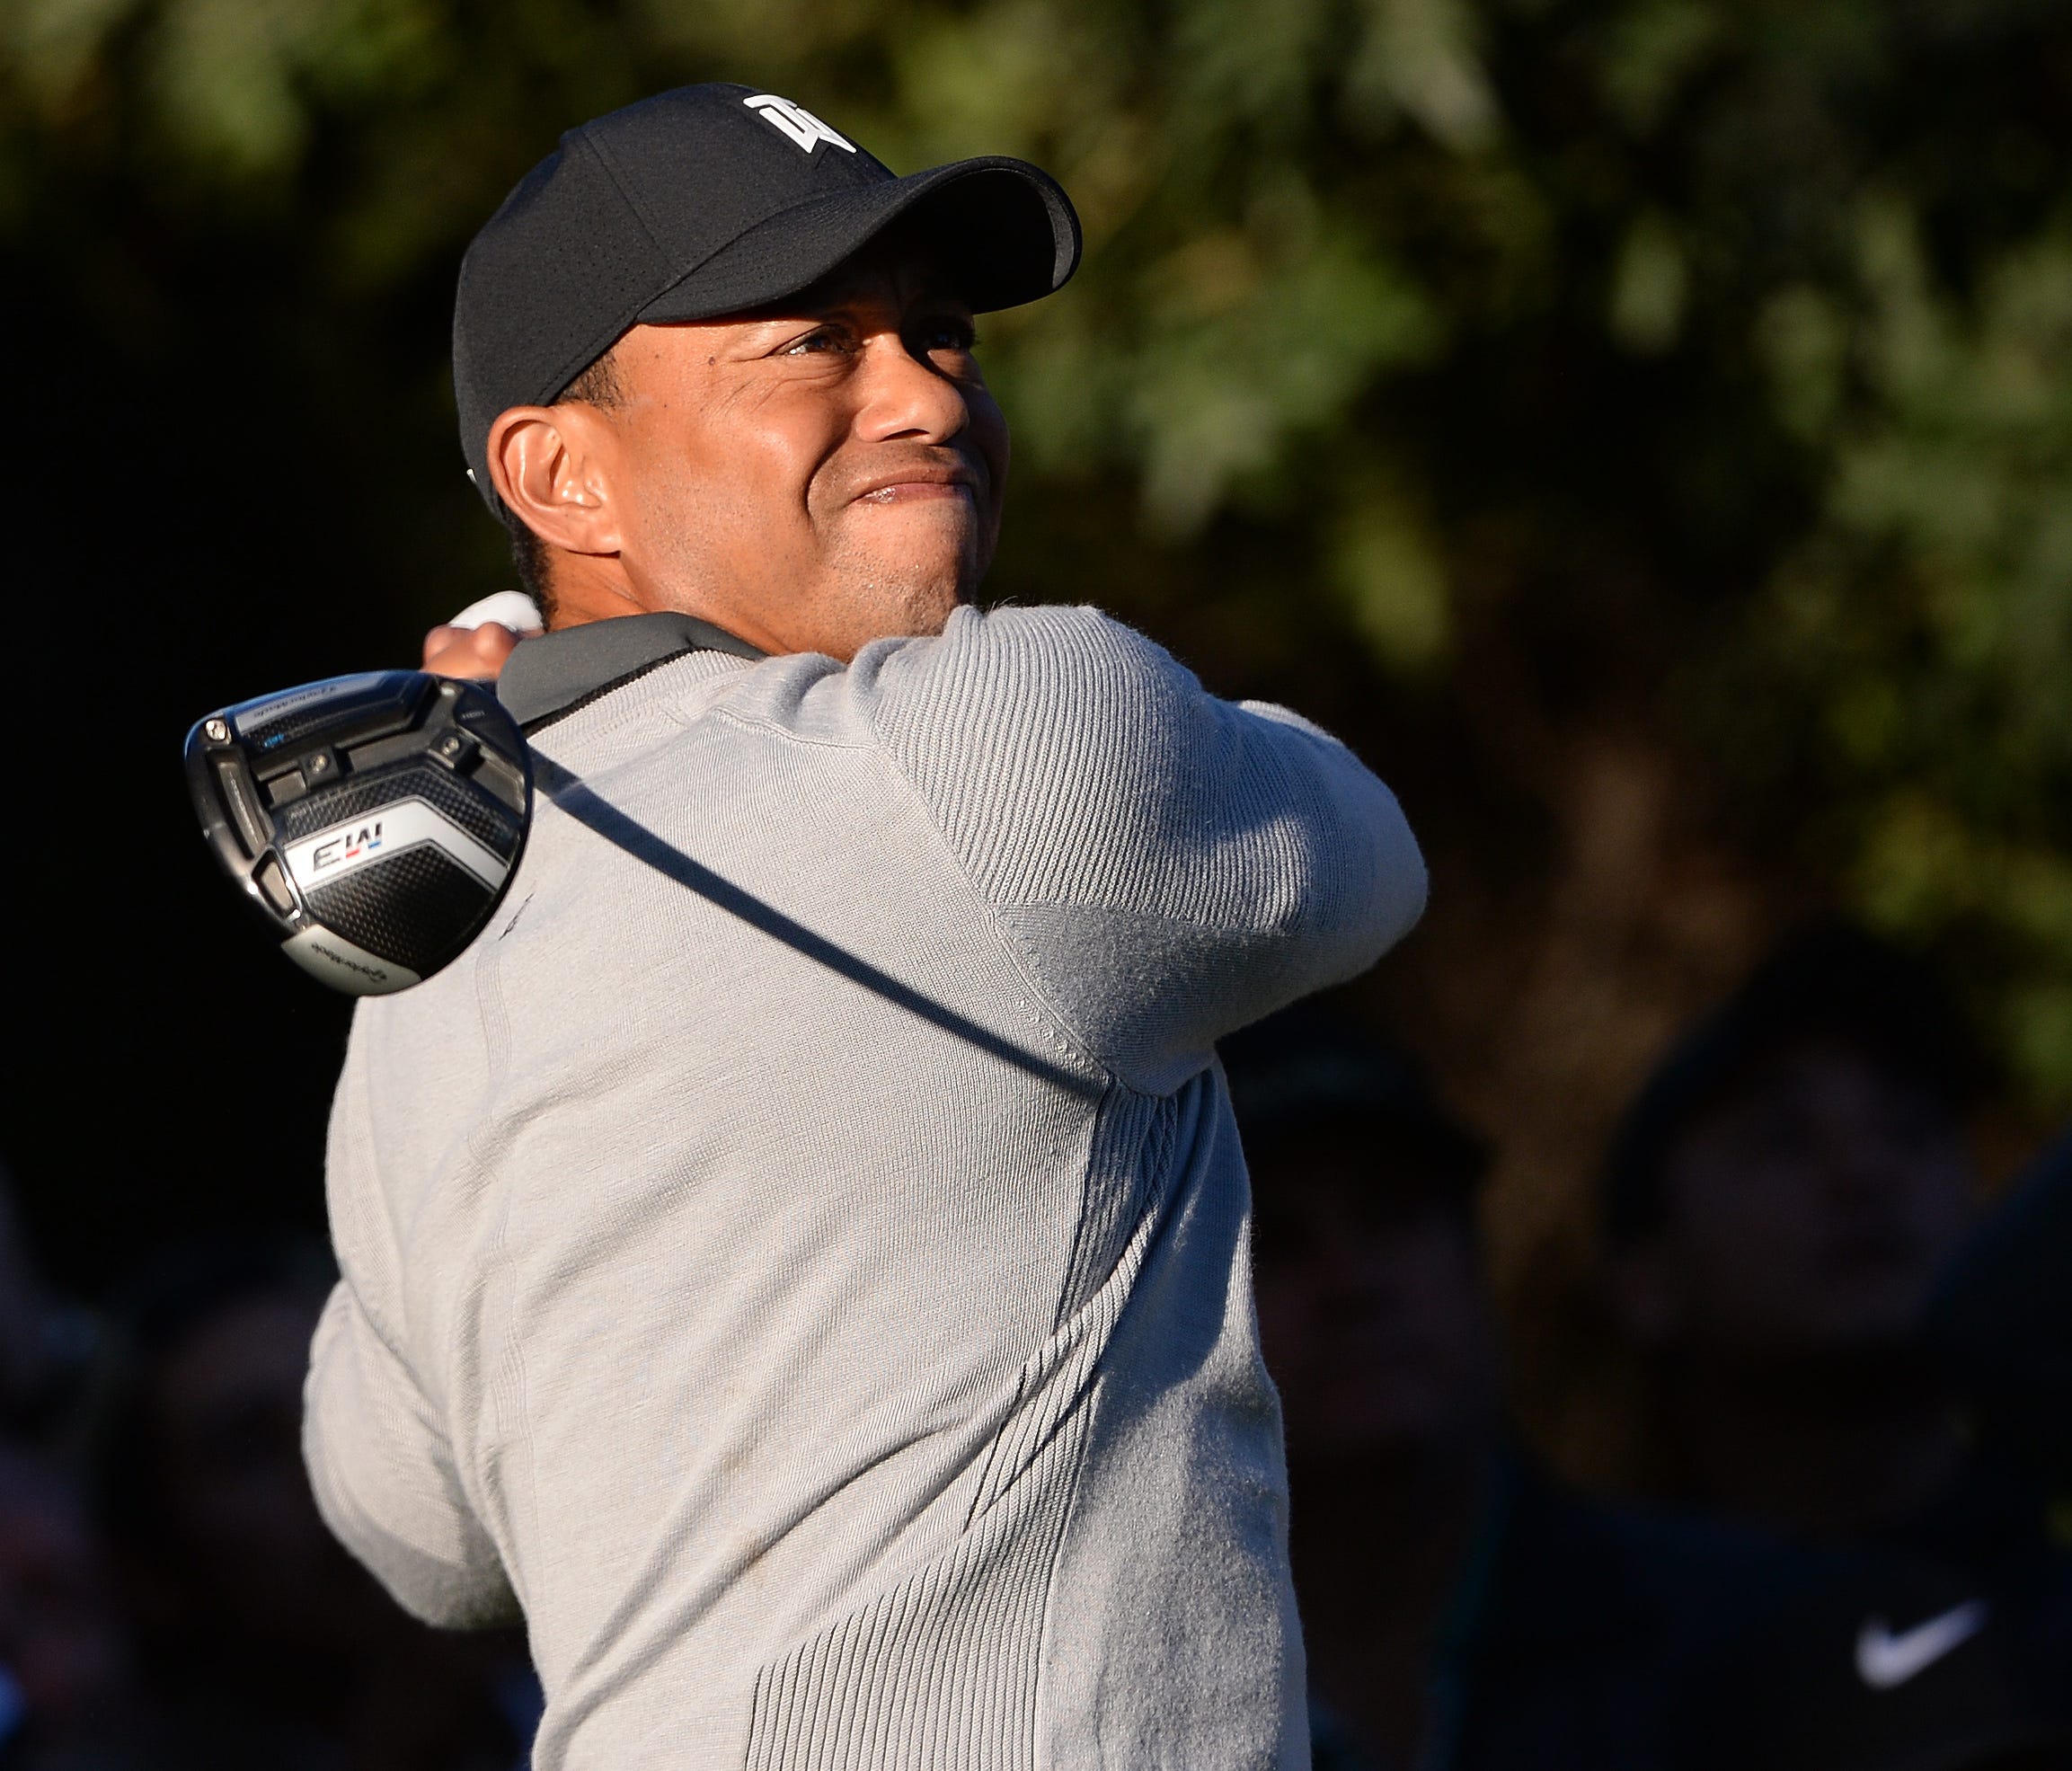 Tiger Woods is back in action this week at the Honda Classic.